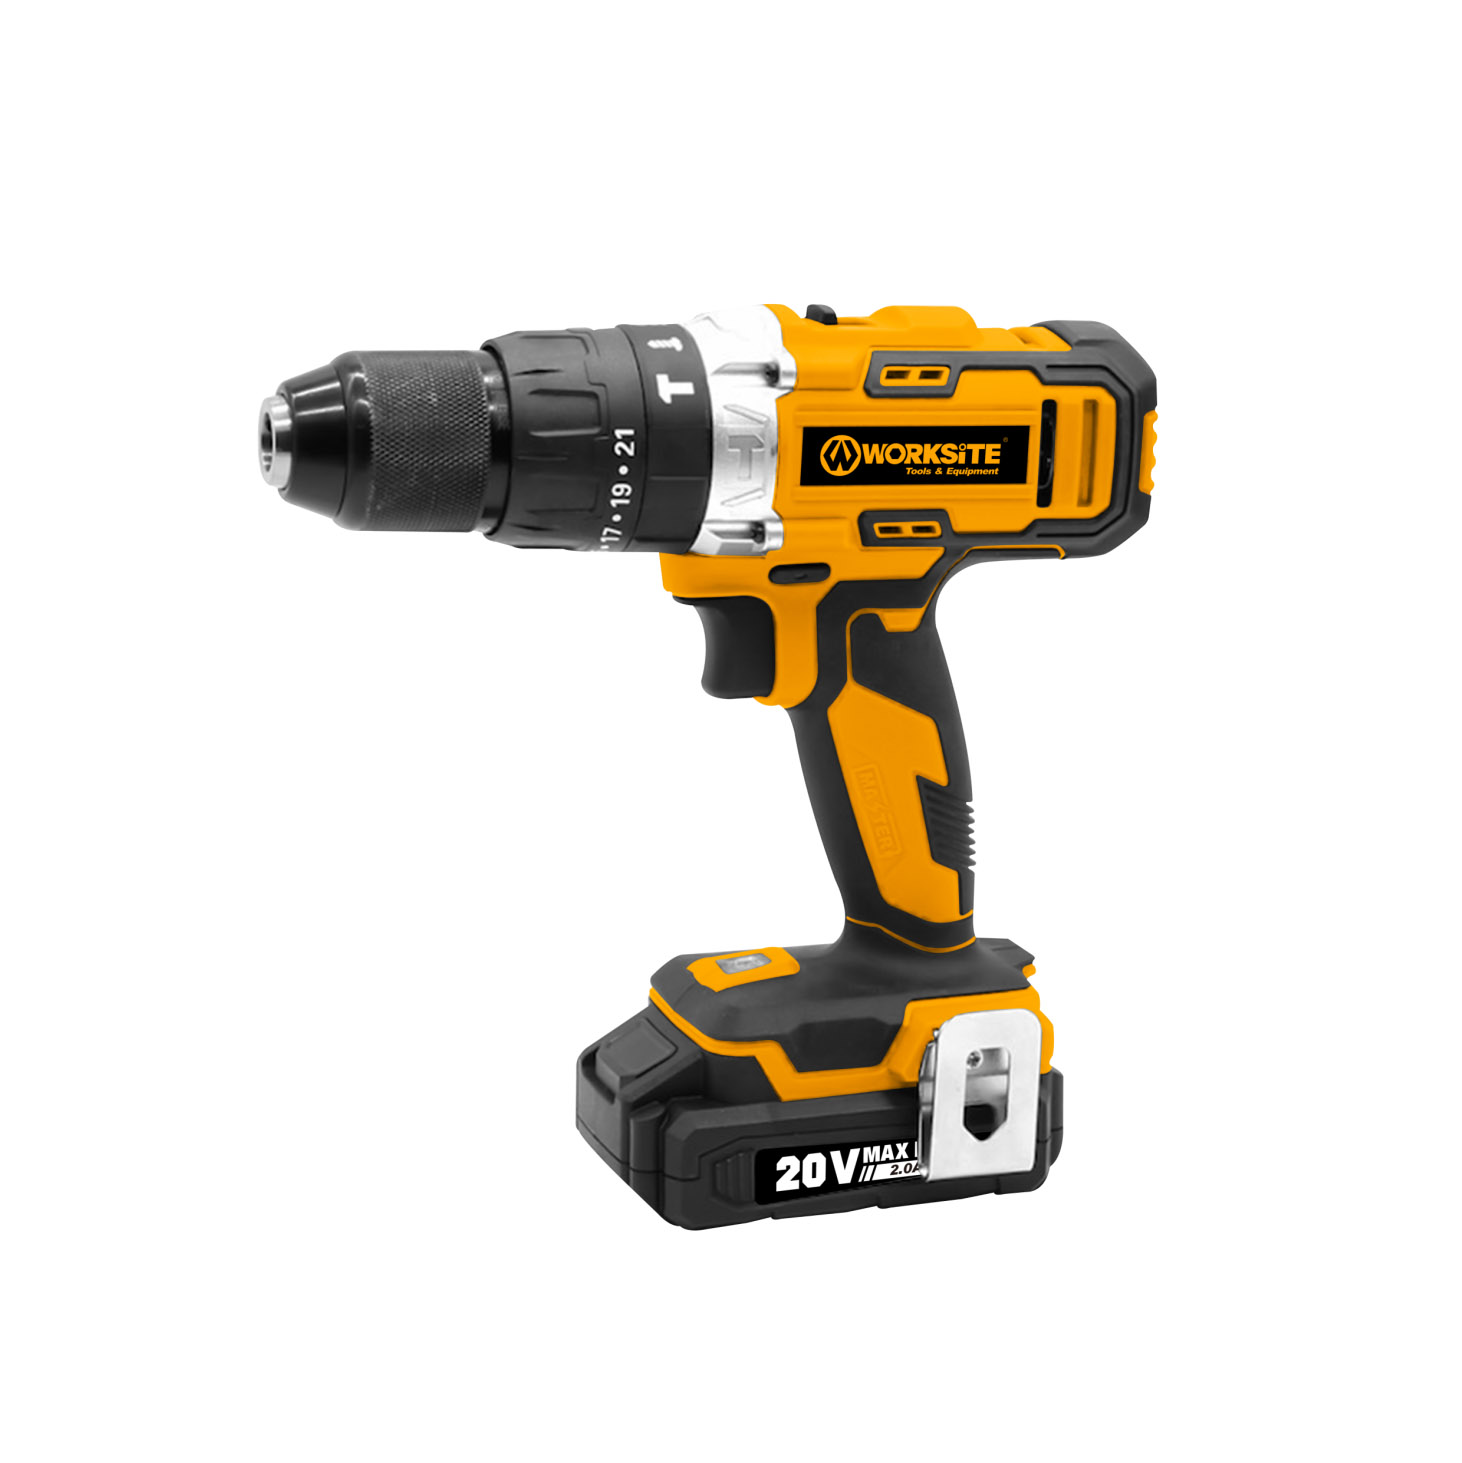 Worksite Cordless Hammer Drill 20V CD334H - Quincaillerie A1's Online ...